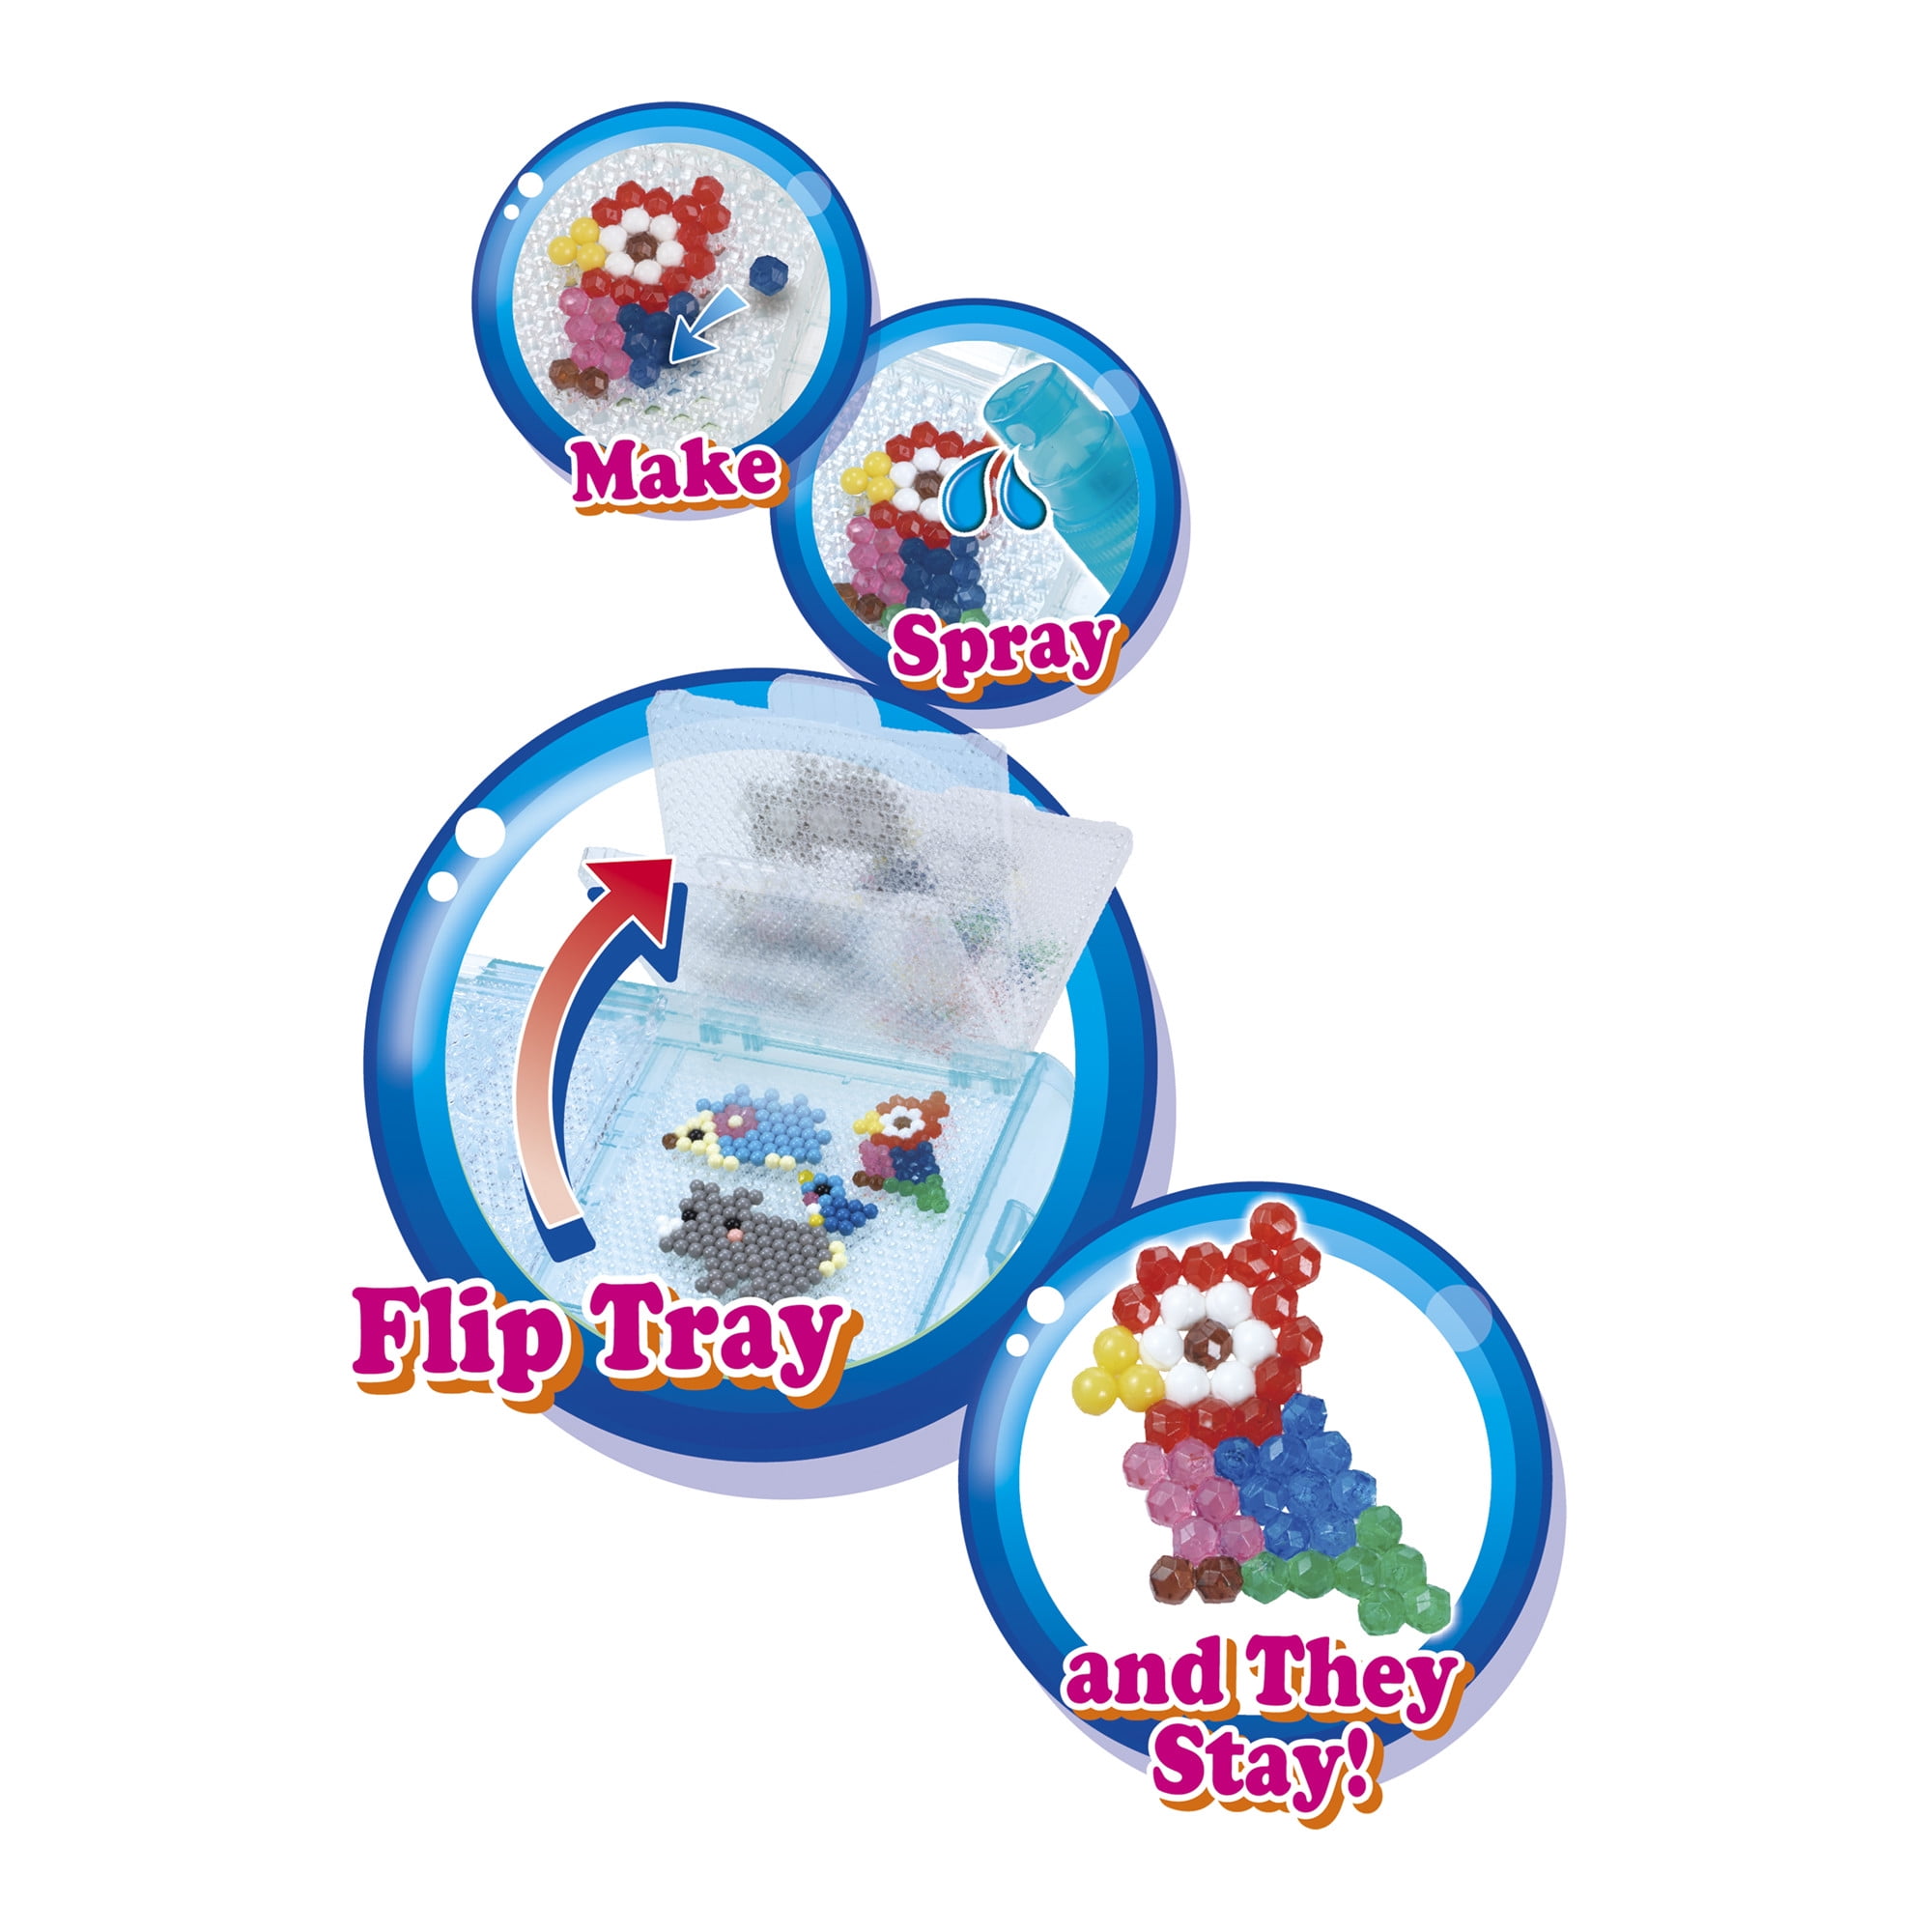 AquaBeads Jewel Bead Refill Playset - Givens Books and Little Dickens